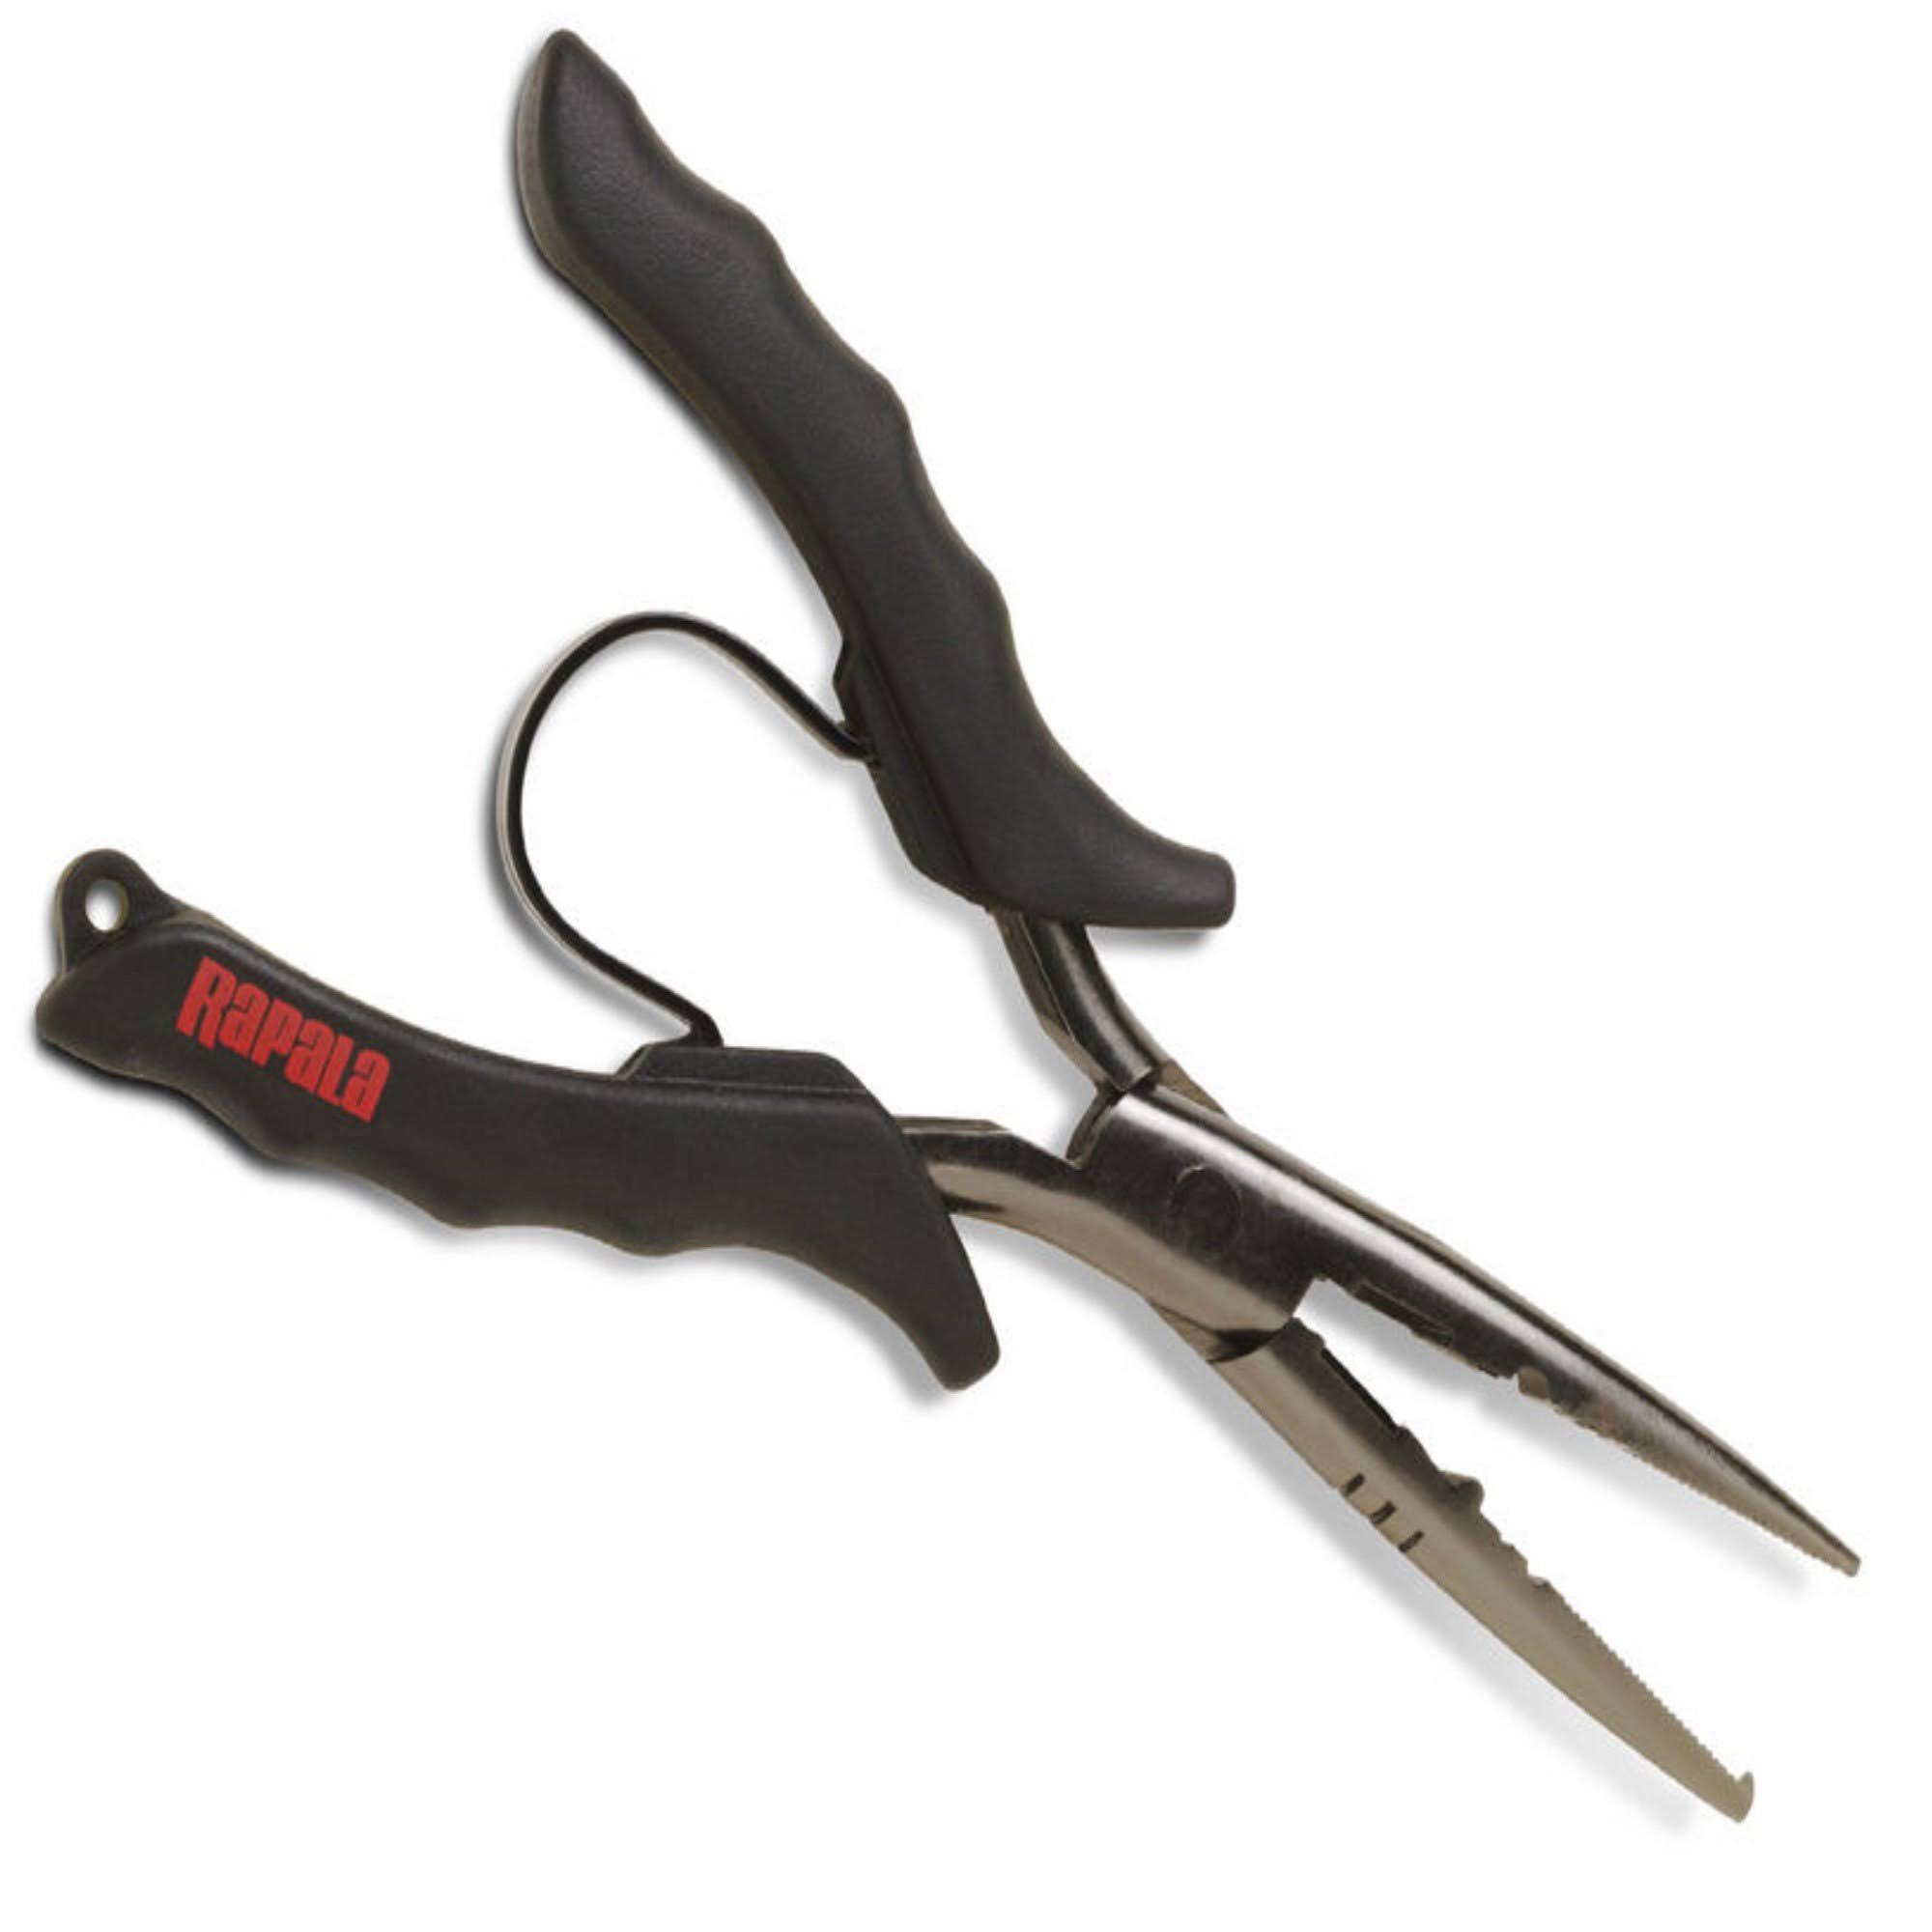 Rapala Stainless Steel Pliers - 6.5"